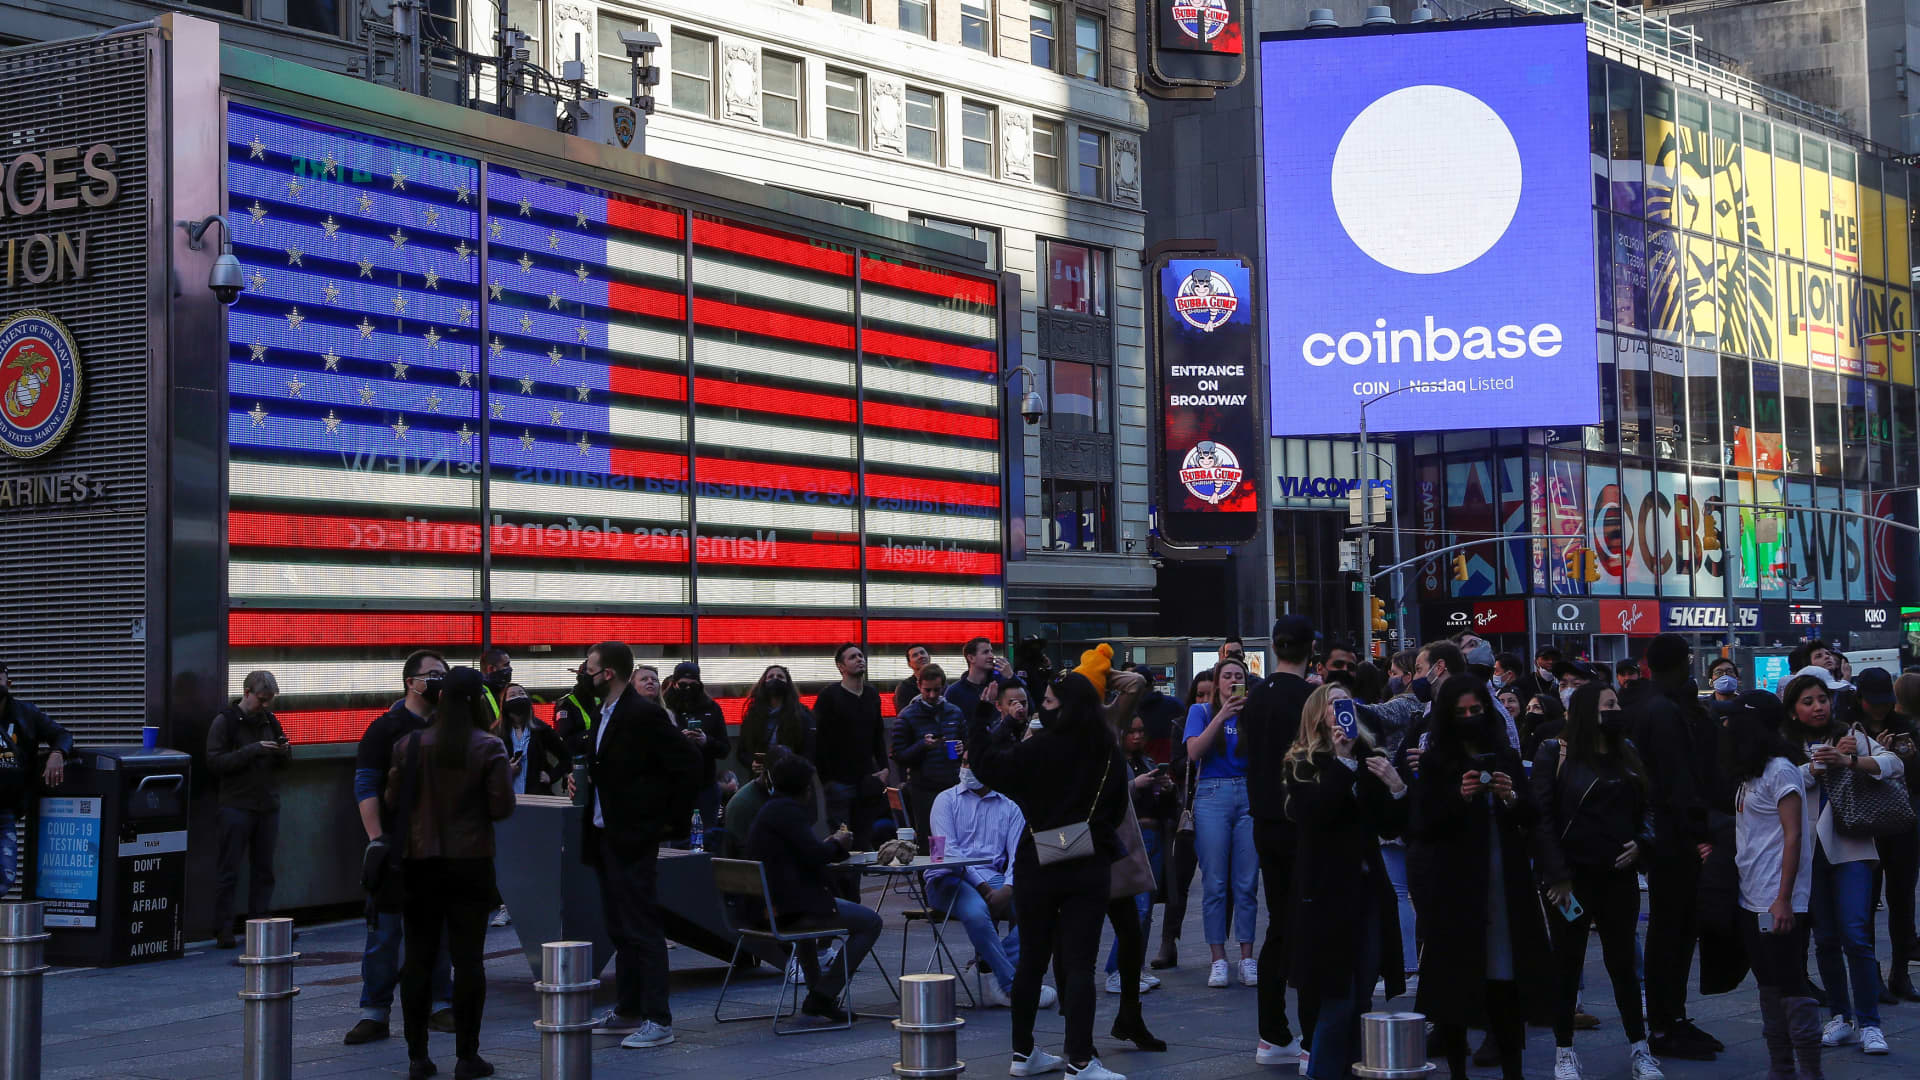 Coinbase just took a stake in stablecoin issuer Circle. Here’s what it could mean for the crypto exchange